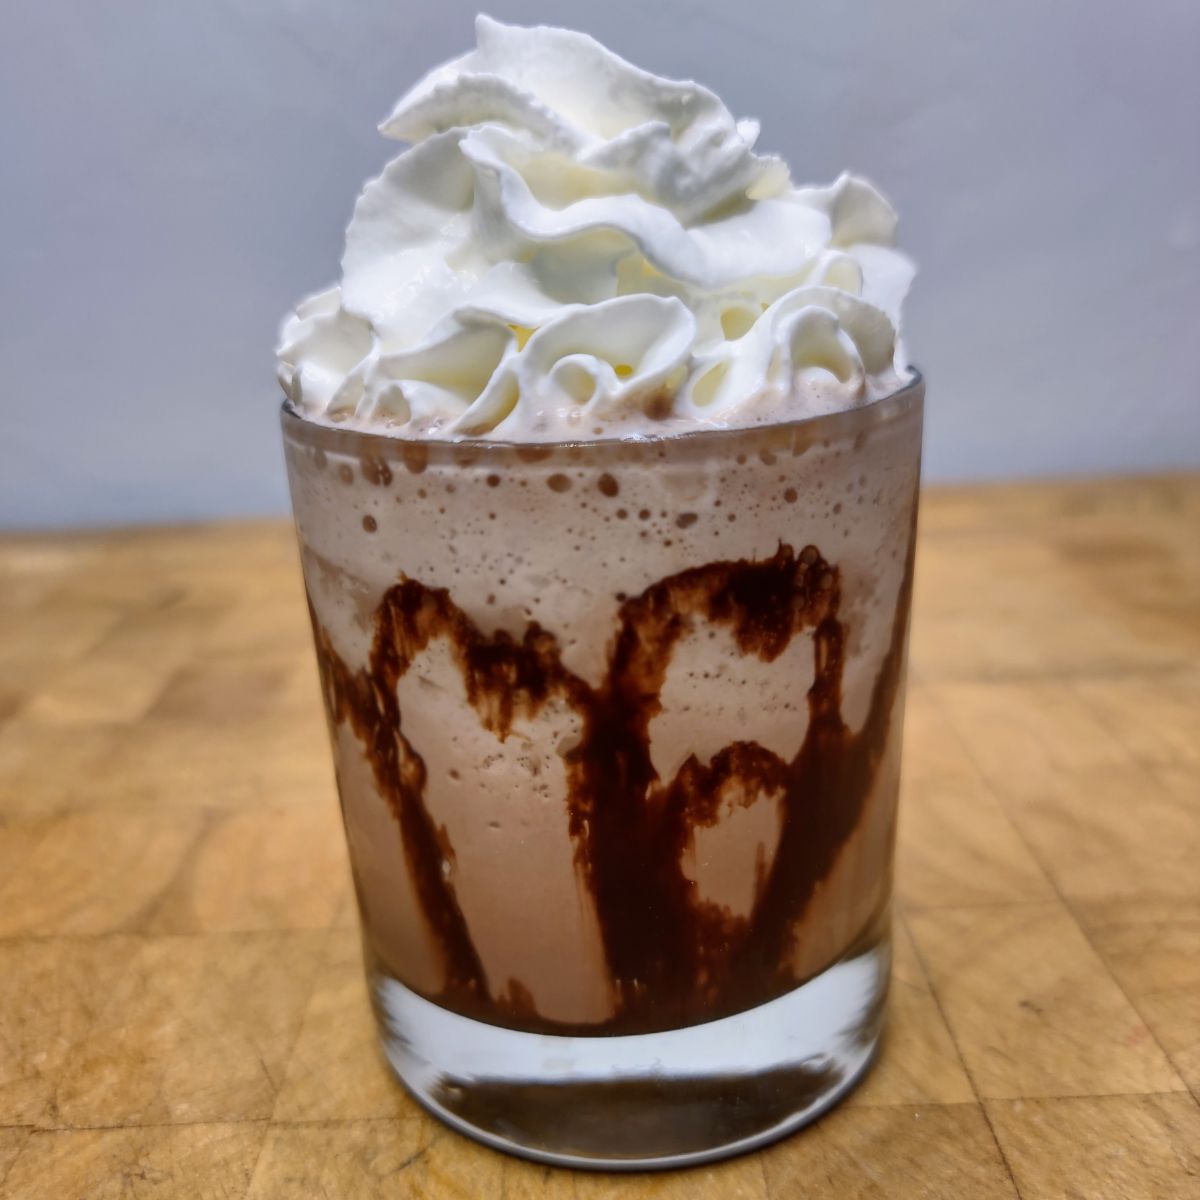 Frozen hot chocolate with whipped cream on top on a wooden table.